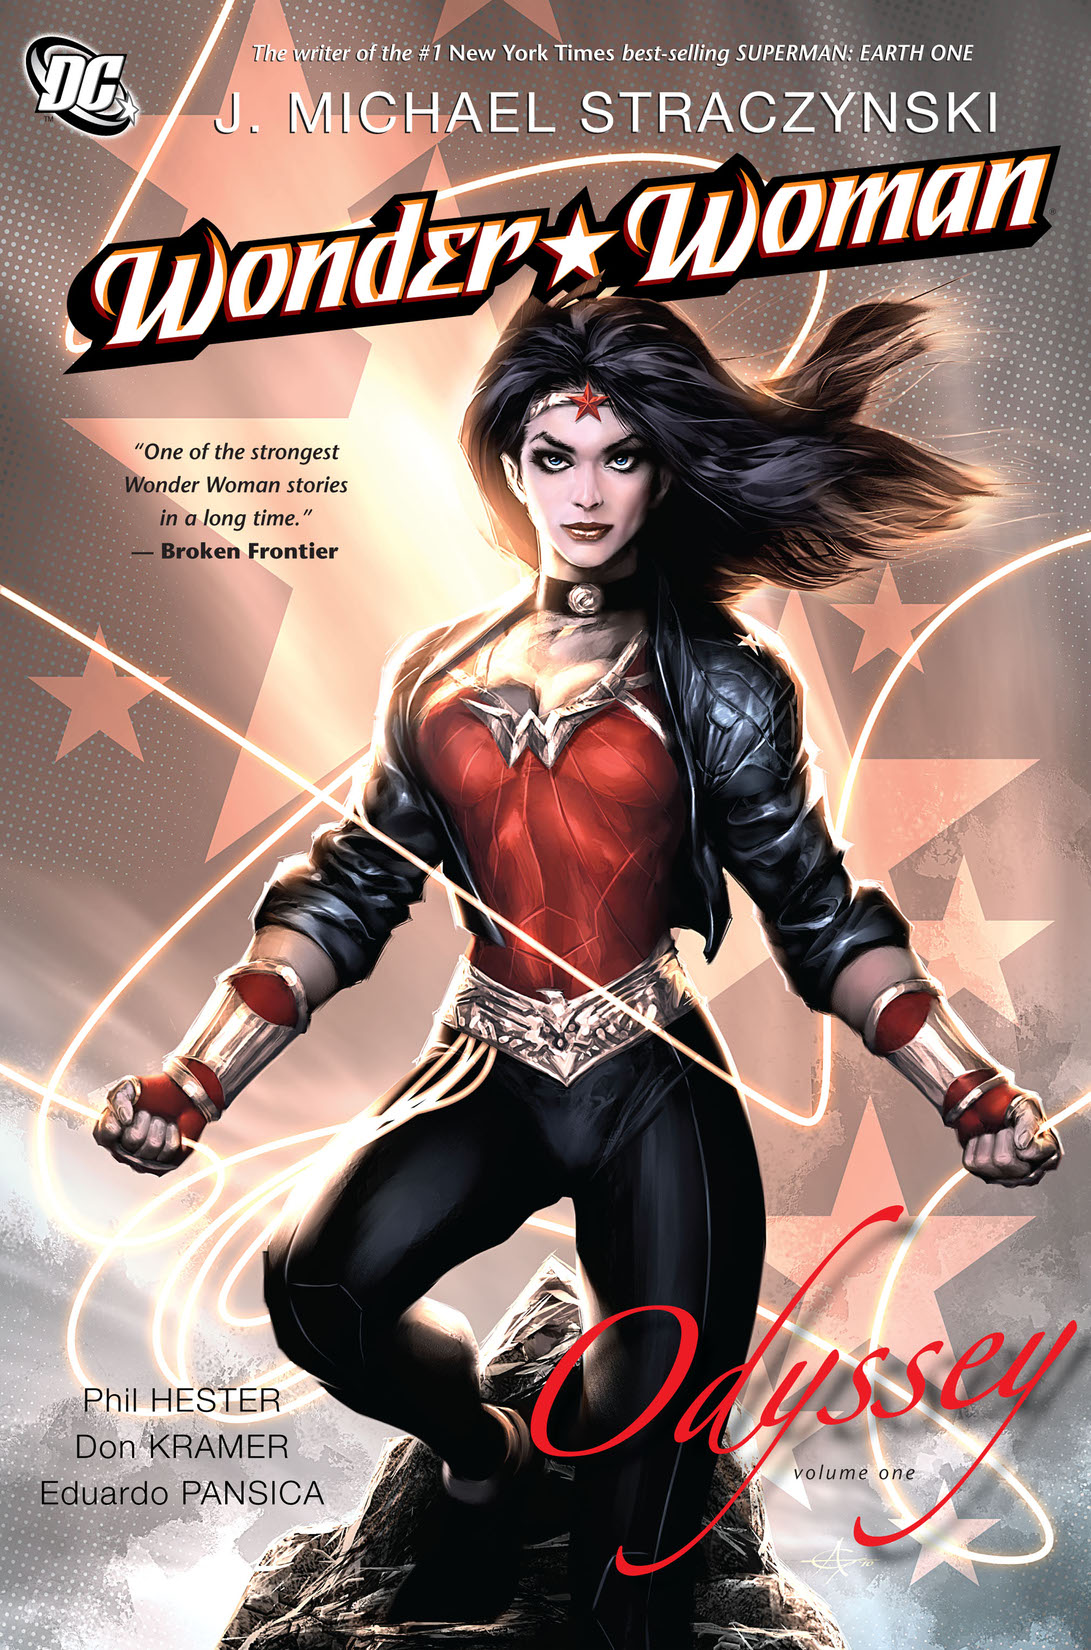 Wonder Woman Vol. 1: Odyssey preview images